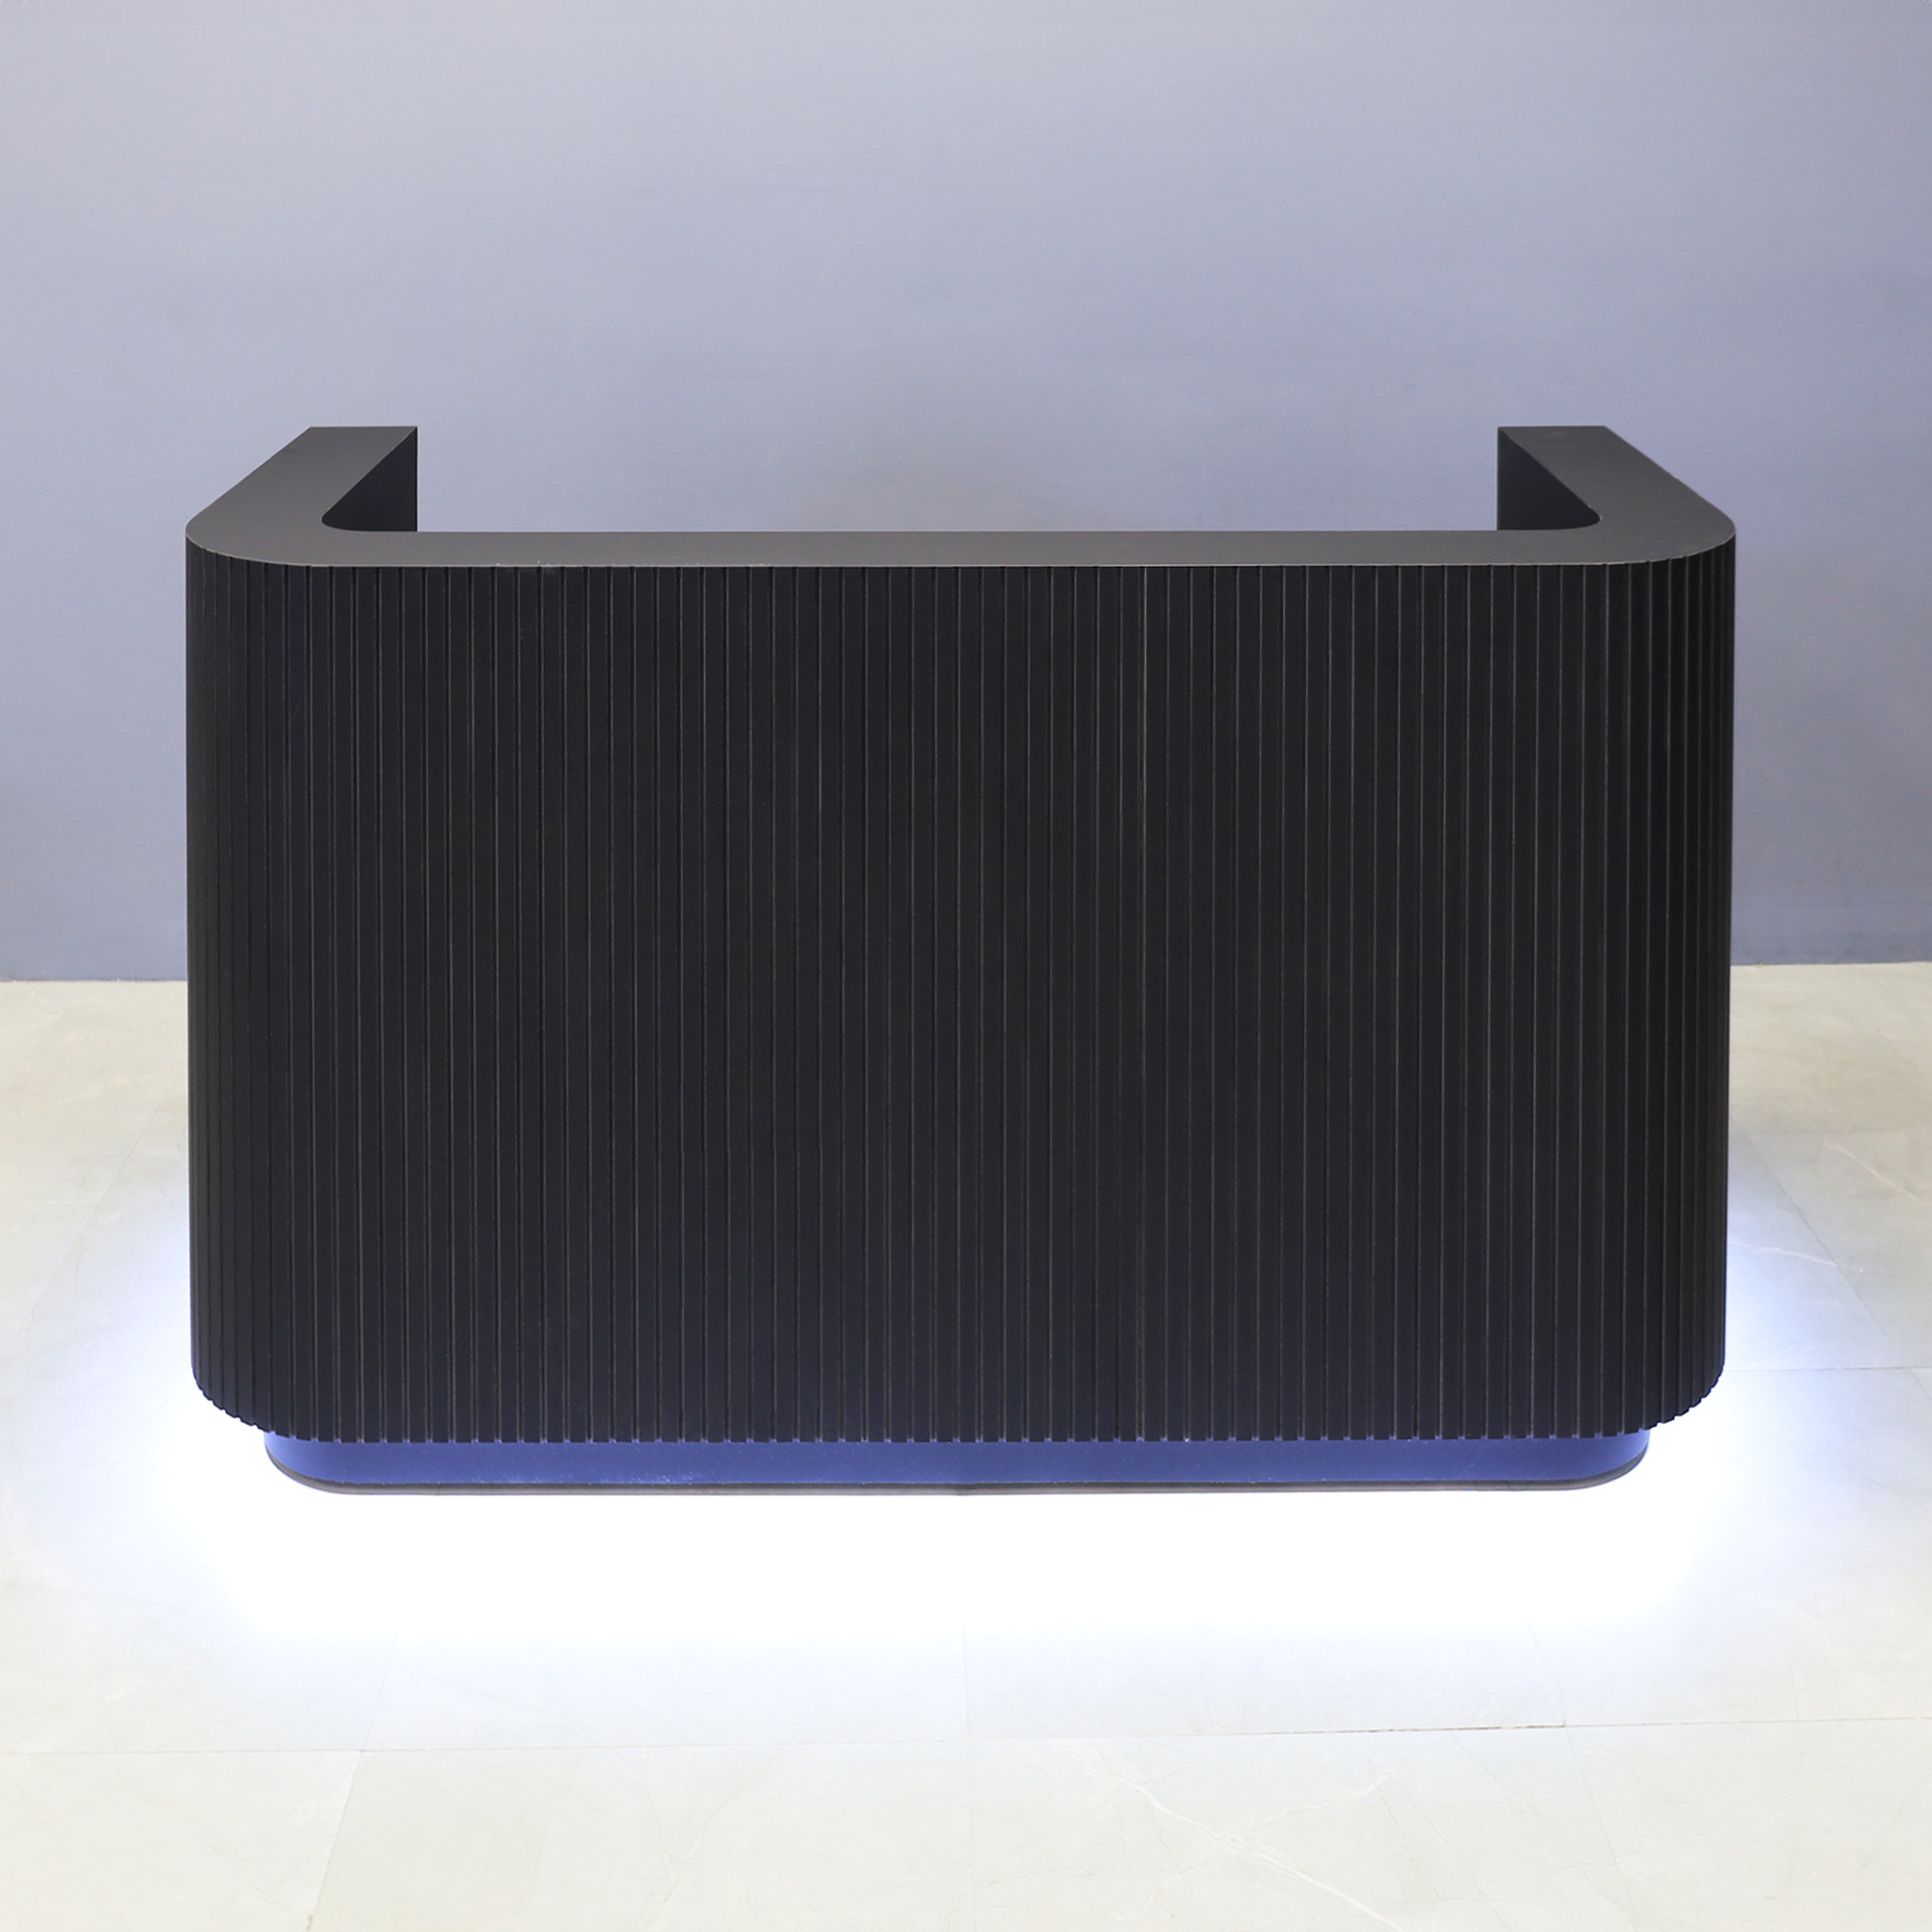 72-inch Nola Custom Reception Desk in black traceless tambour main desk and black traceless laminate workspace and toe-kick, with warm white LED, shown here.